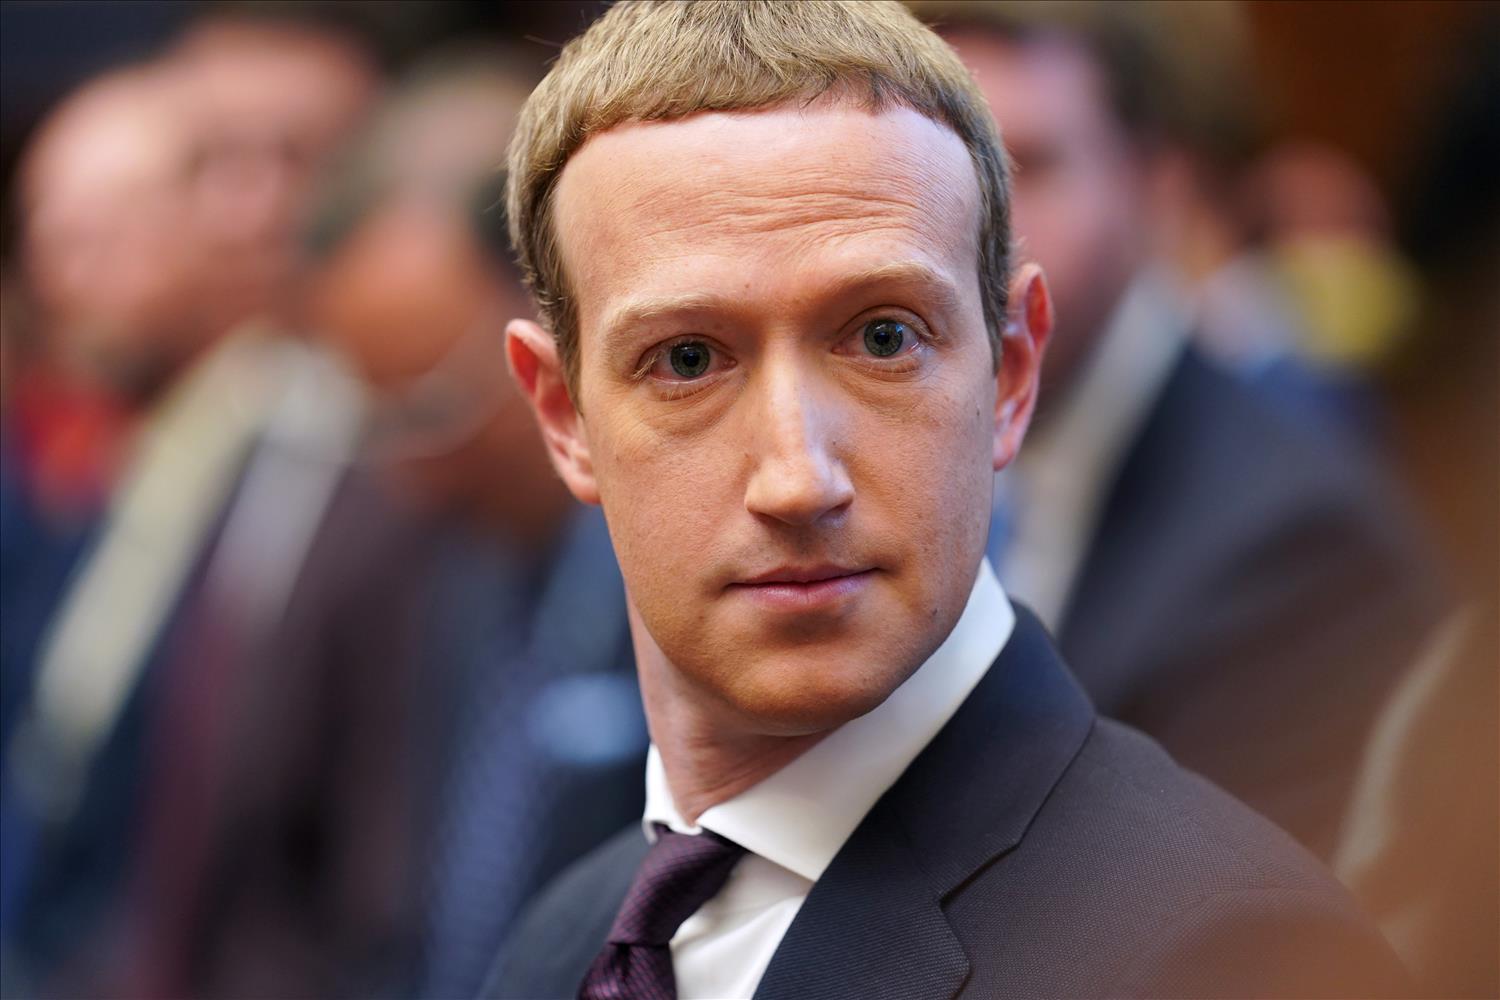  EU Warns Zuckerberg To Protect Kids On Instagram Or Face 'Heavy Sanctions' 